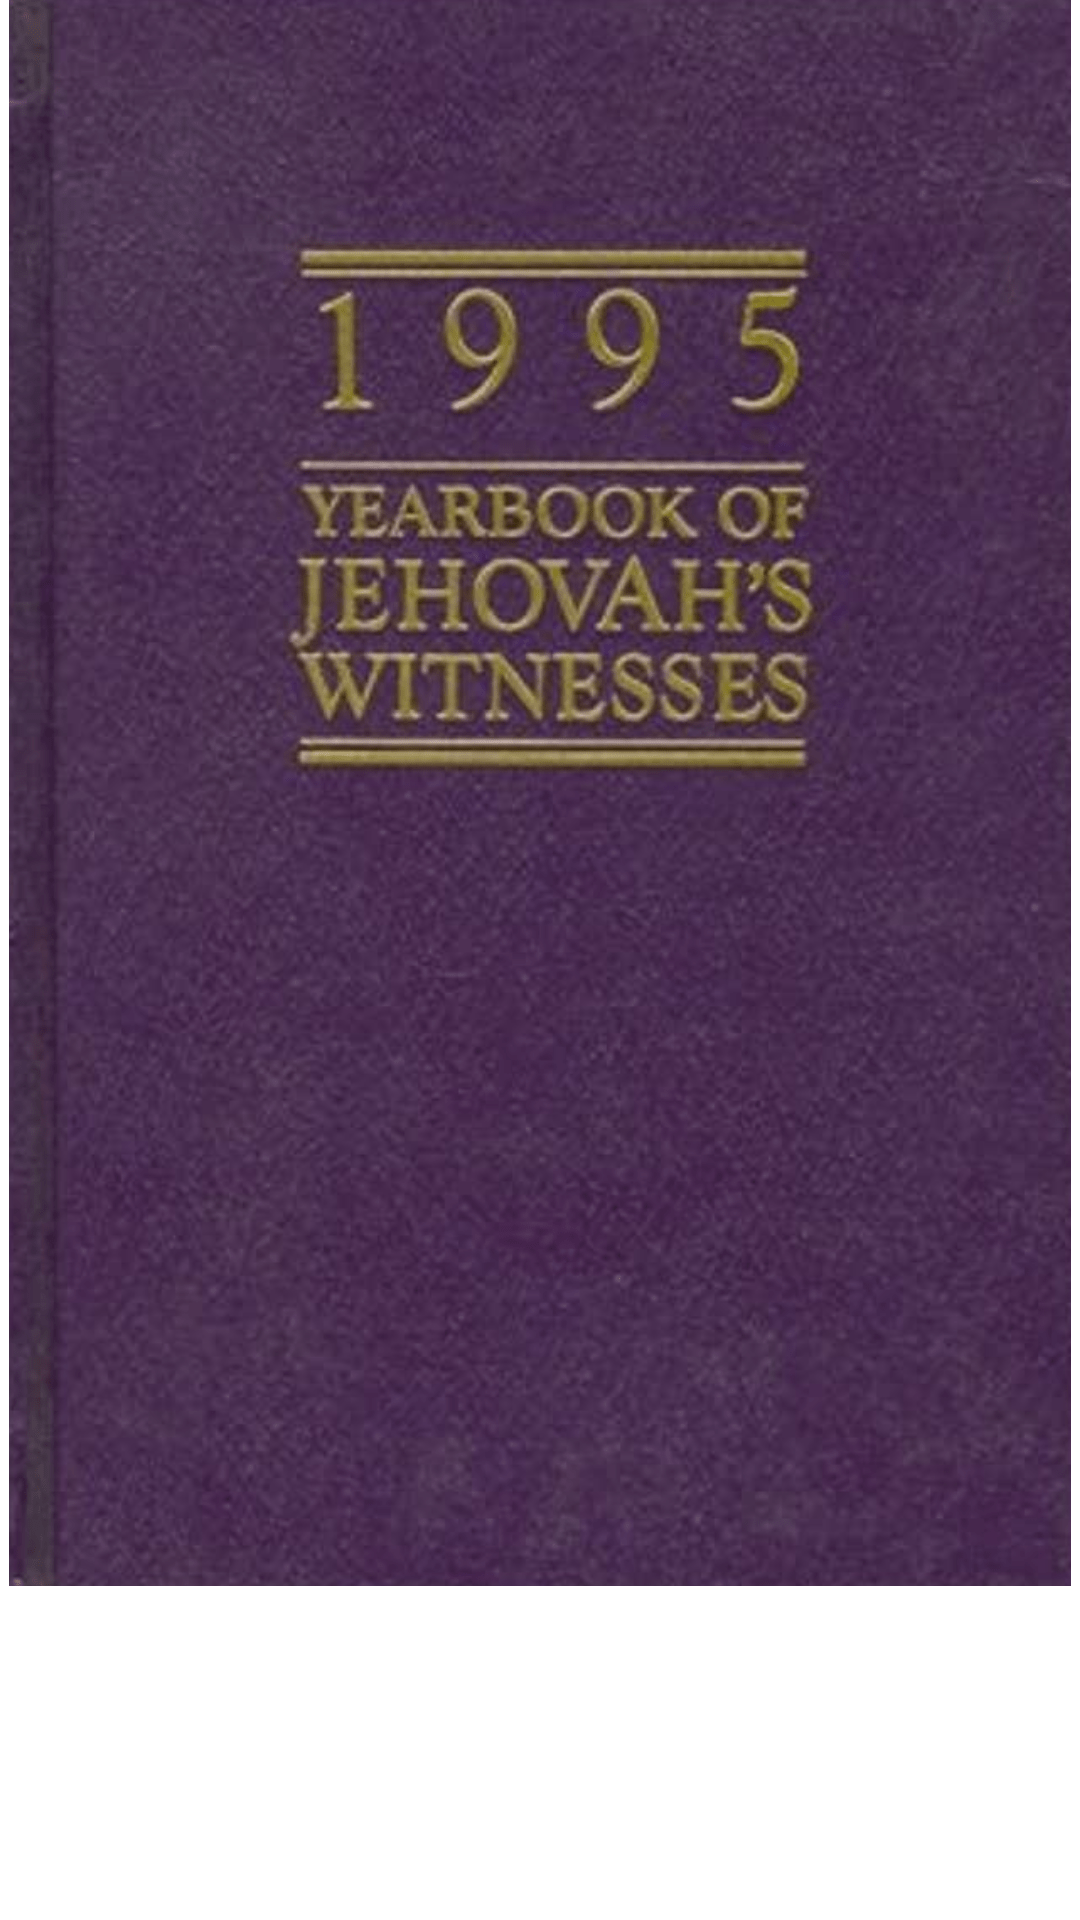 1995 Yearbook Of Jehovah's Witnesses